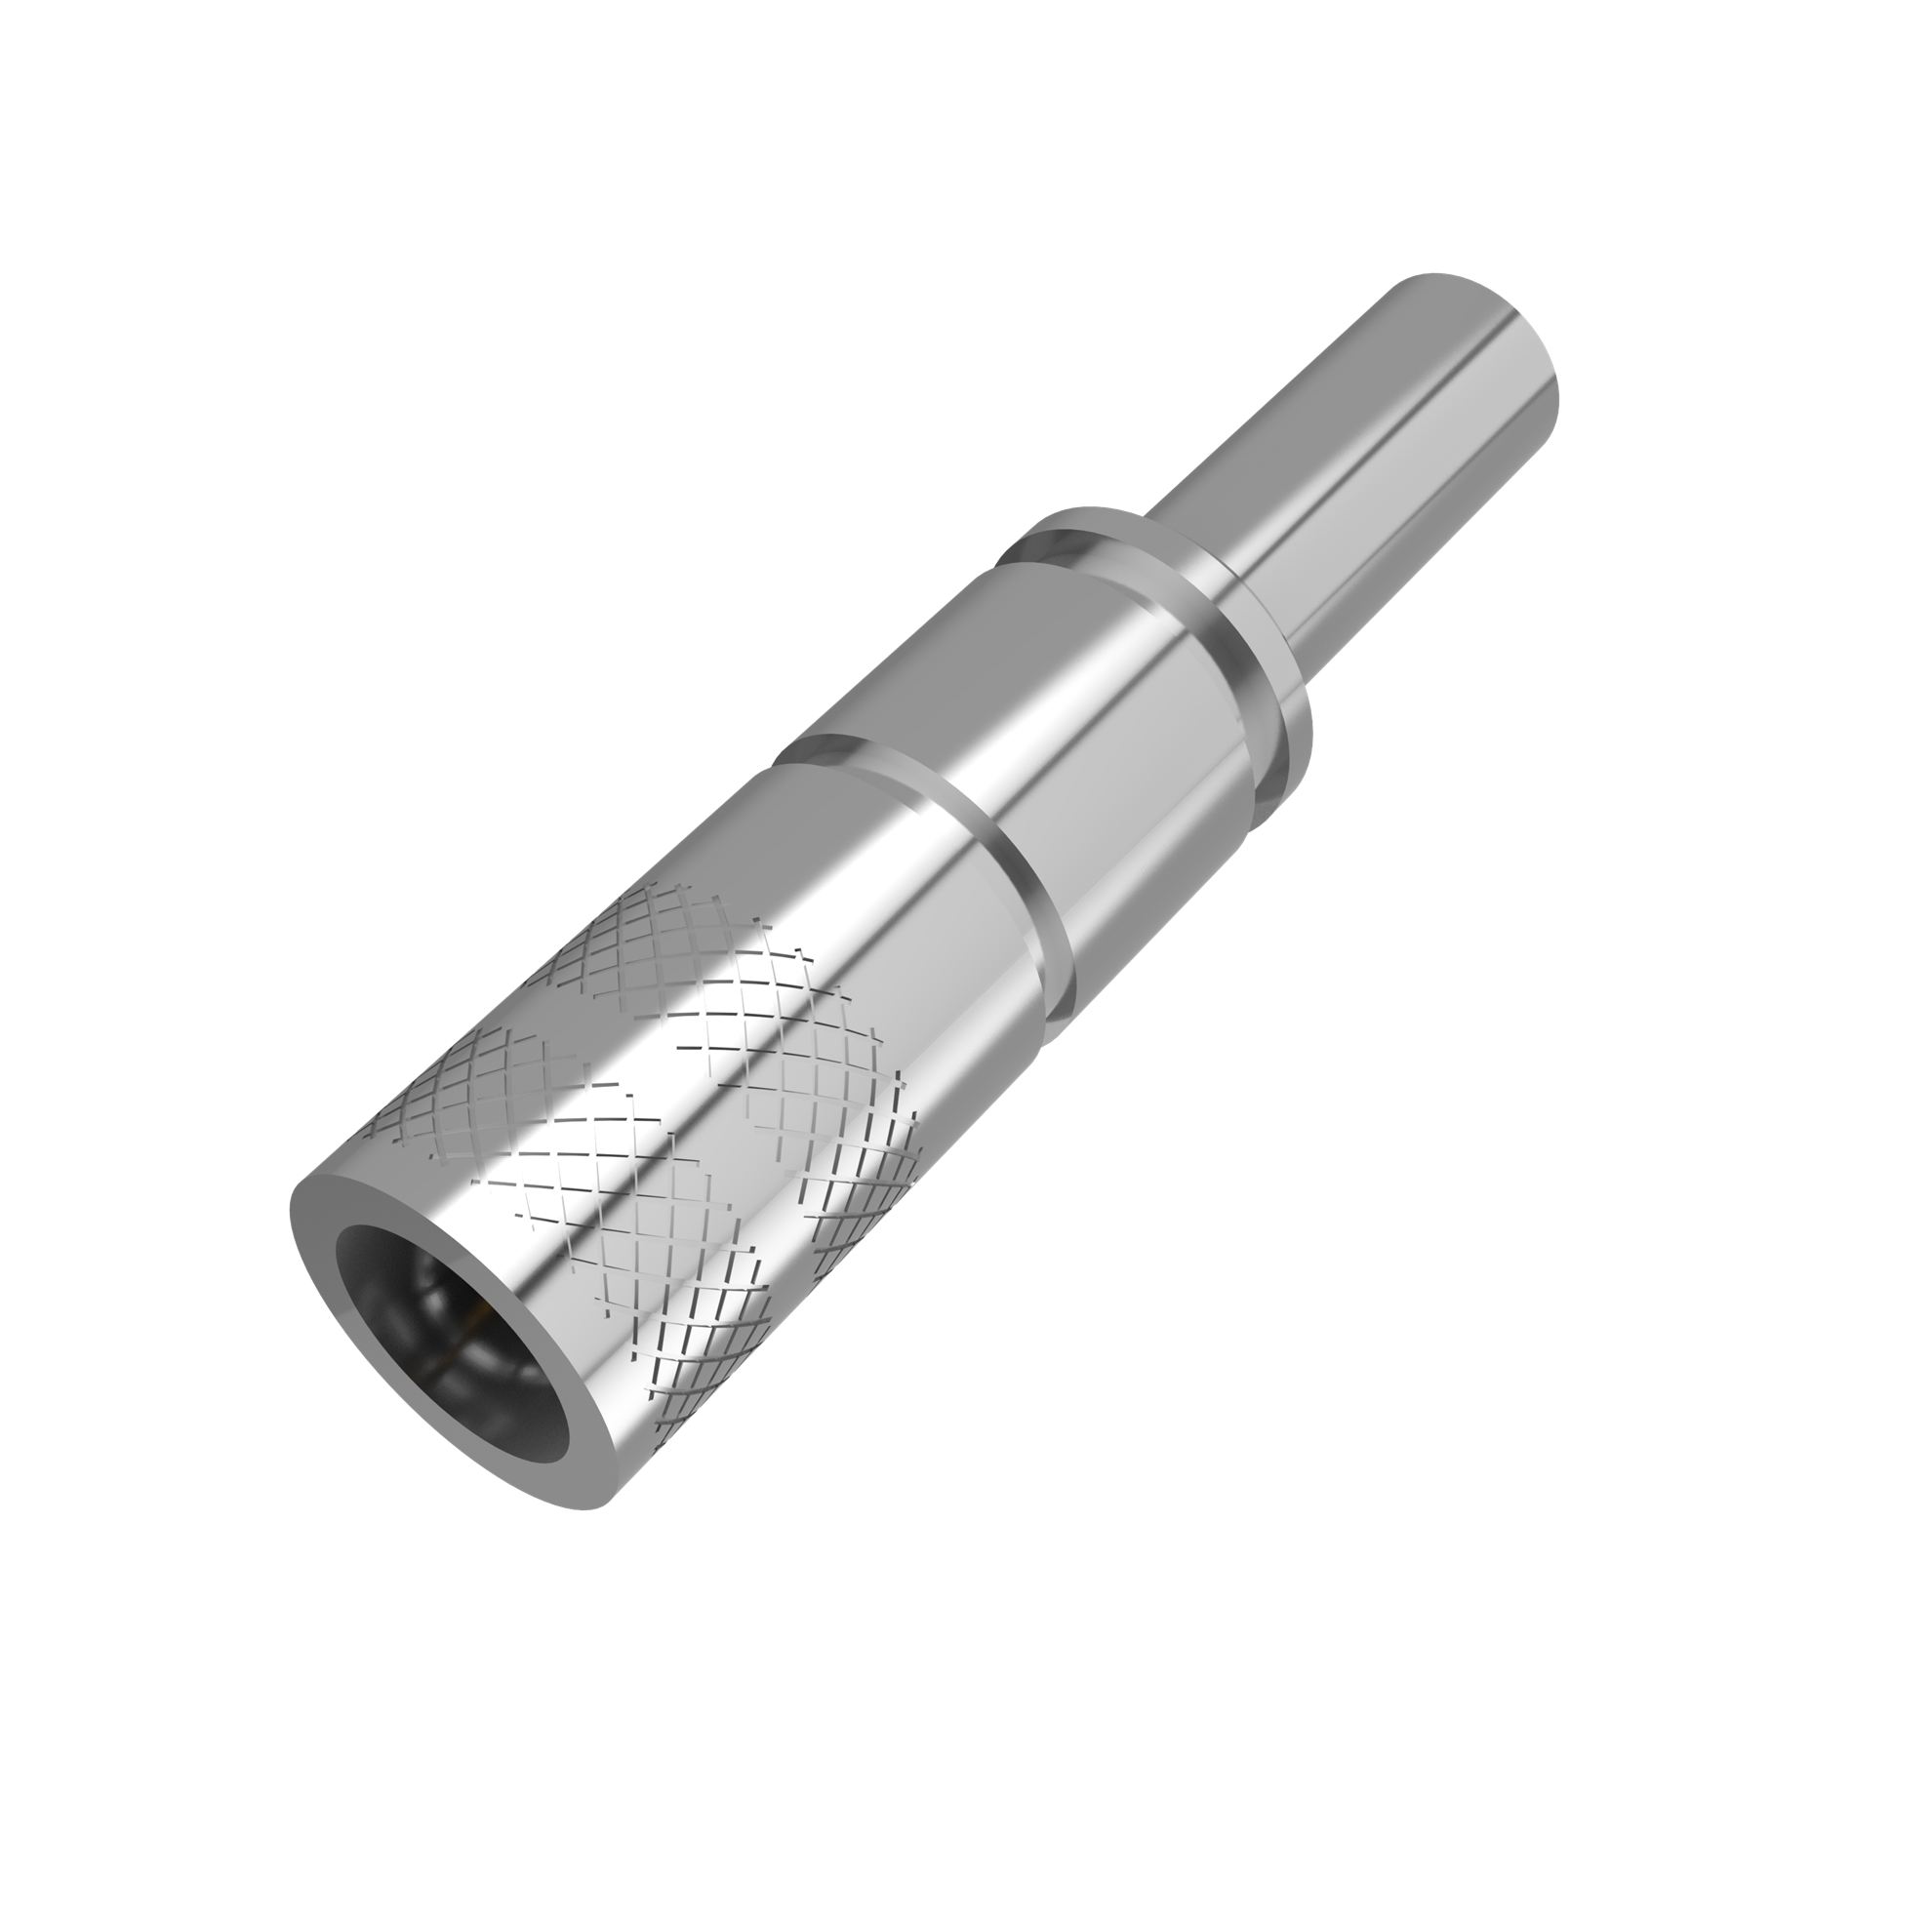 Miniature 1.0/2.3 Connector Plug Straight Crimping For ST779 Coaxial Cable